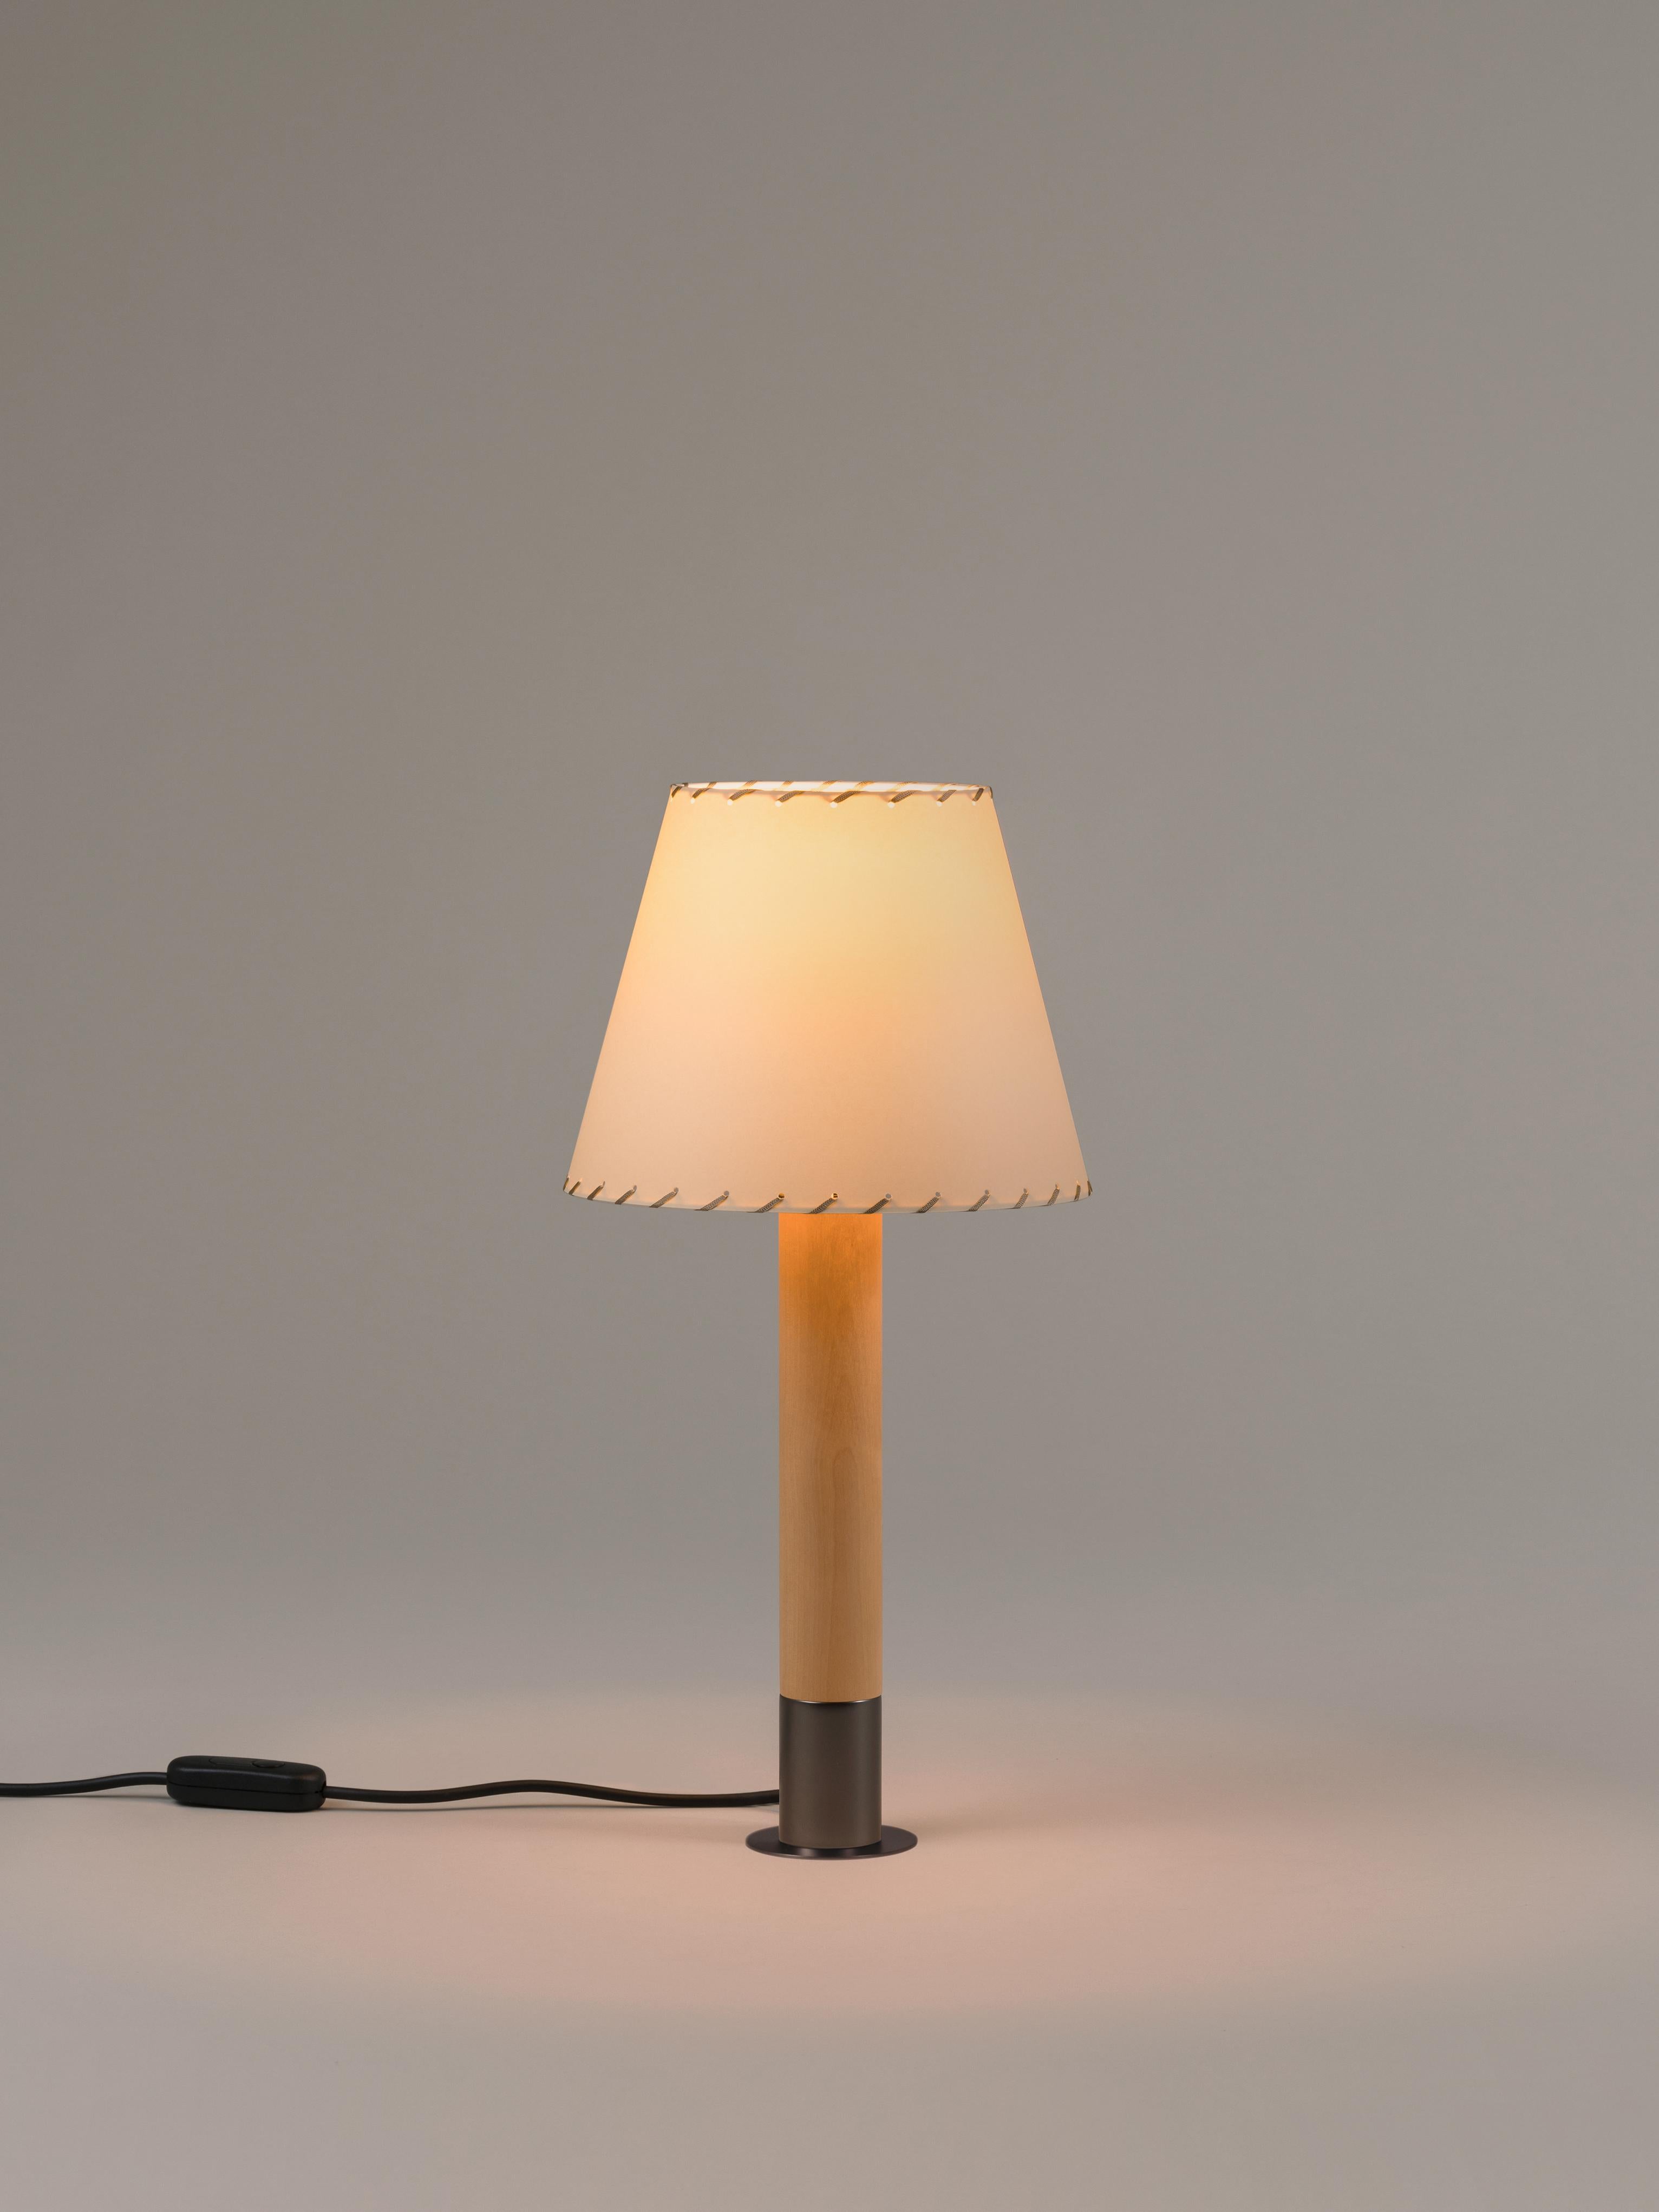 Bronze and Beige Básica M1 table lamp by Santiago Roqueta, Santa & Cole
Dimensions: D 25 x H 52 cm
Materials: Bronze, birch wood, paperboard.
Available in other shade colors and with or without the stabilizing disc.
Available in nickel or